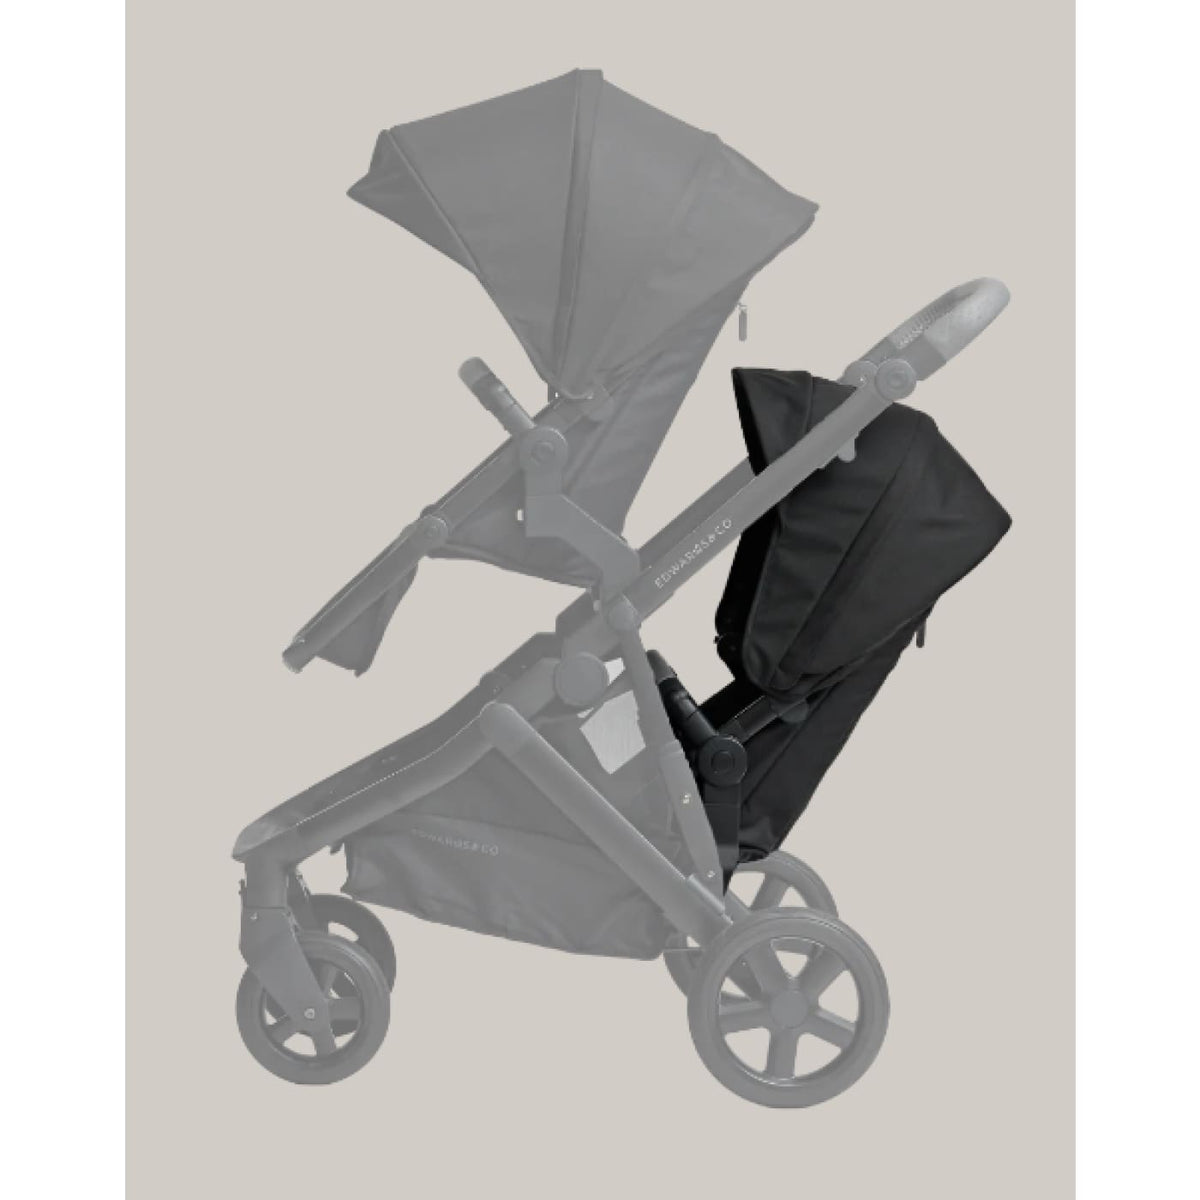 Edwards &amp; Co Olive Stroller Second Seat Kit - Black Luxe - Black Luxe - PRAMS &amp; STROLLERS - TODDLER SEATS/CONVERSION KITS